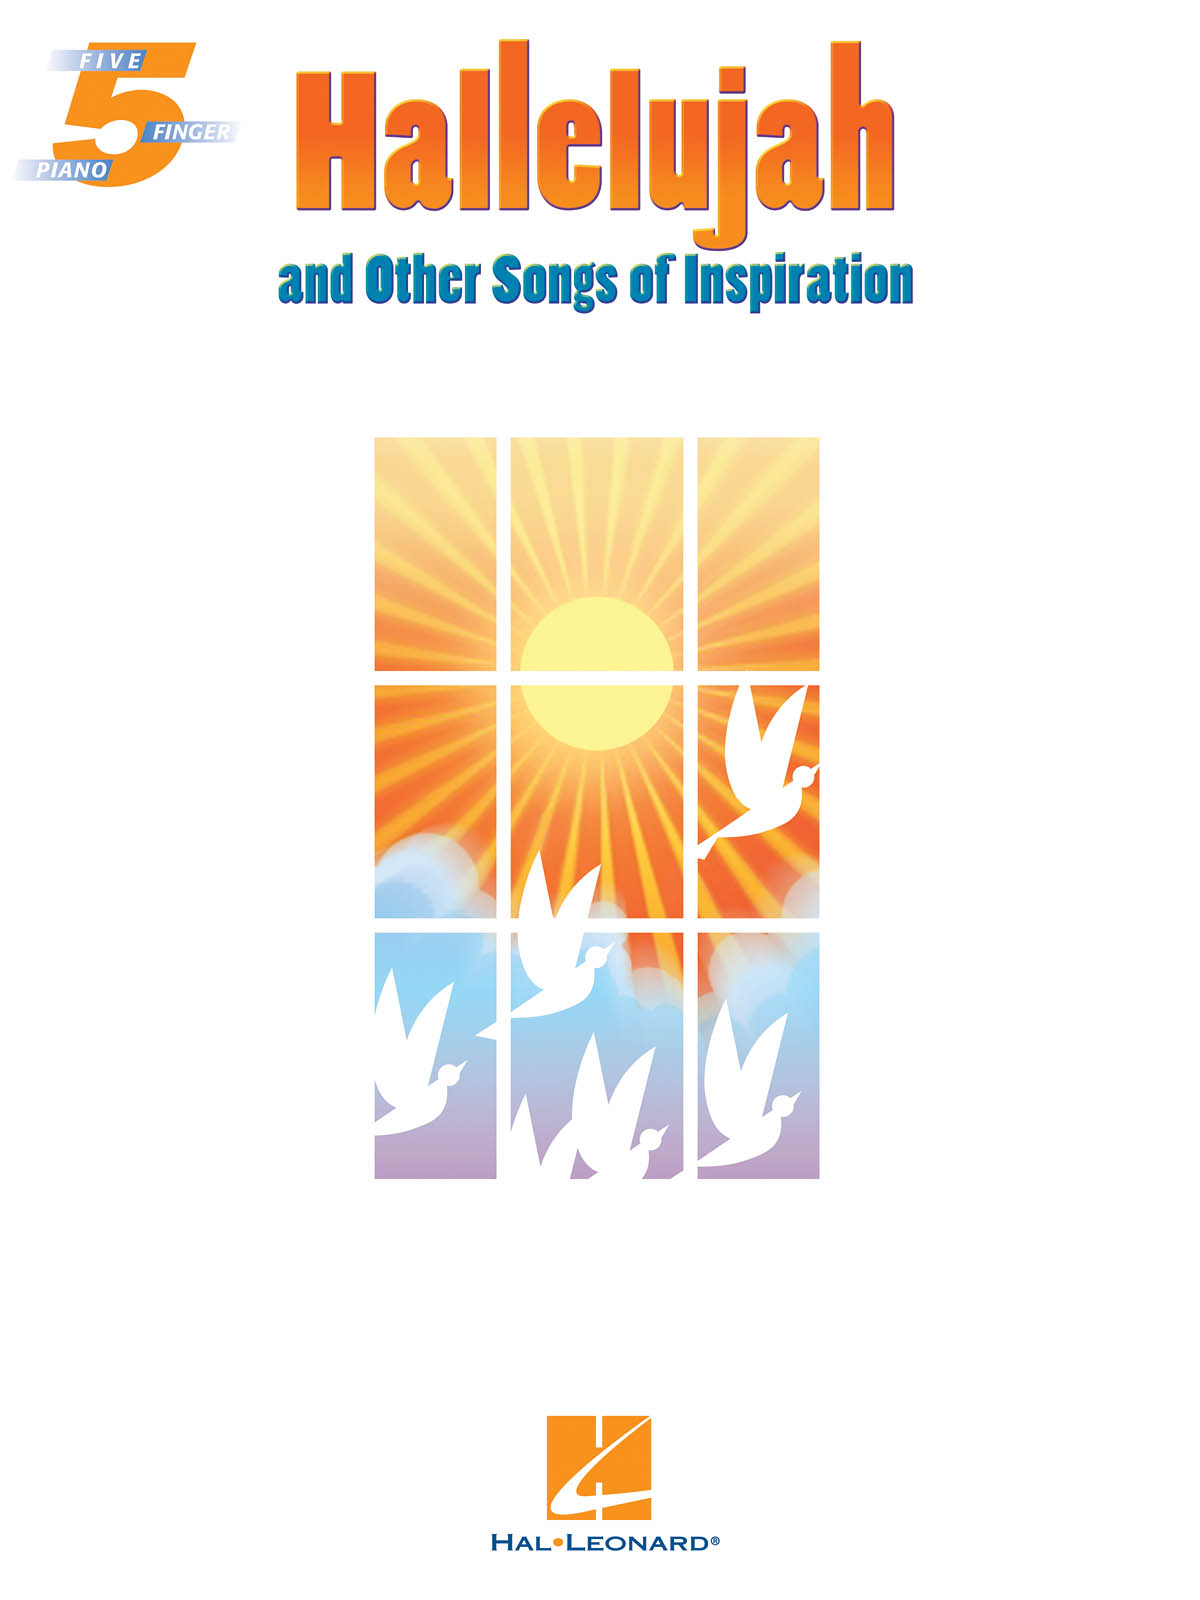 Hallelujah and Other Songs of Inspiration - Five Finger Piano Songbook noty pro klavír